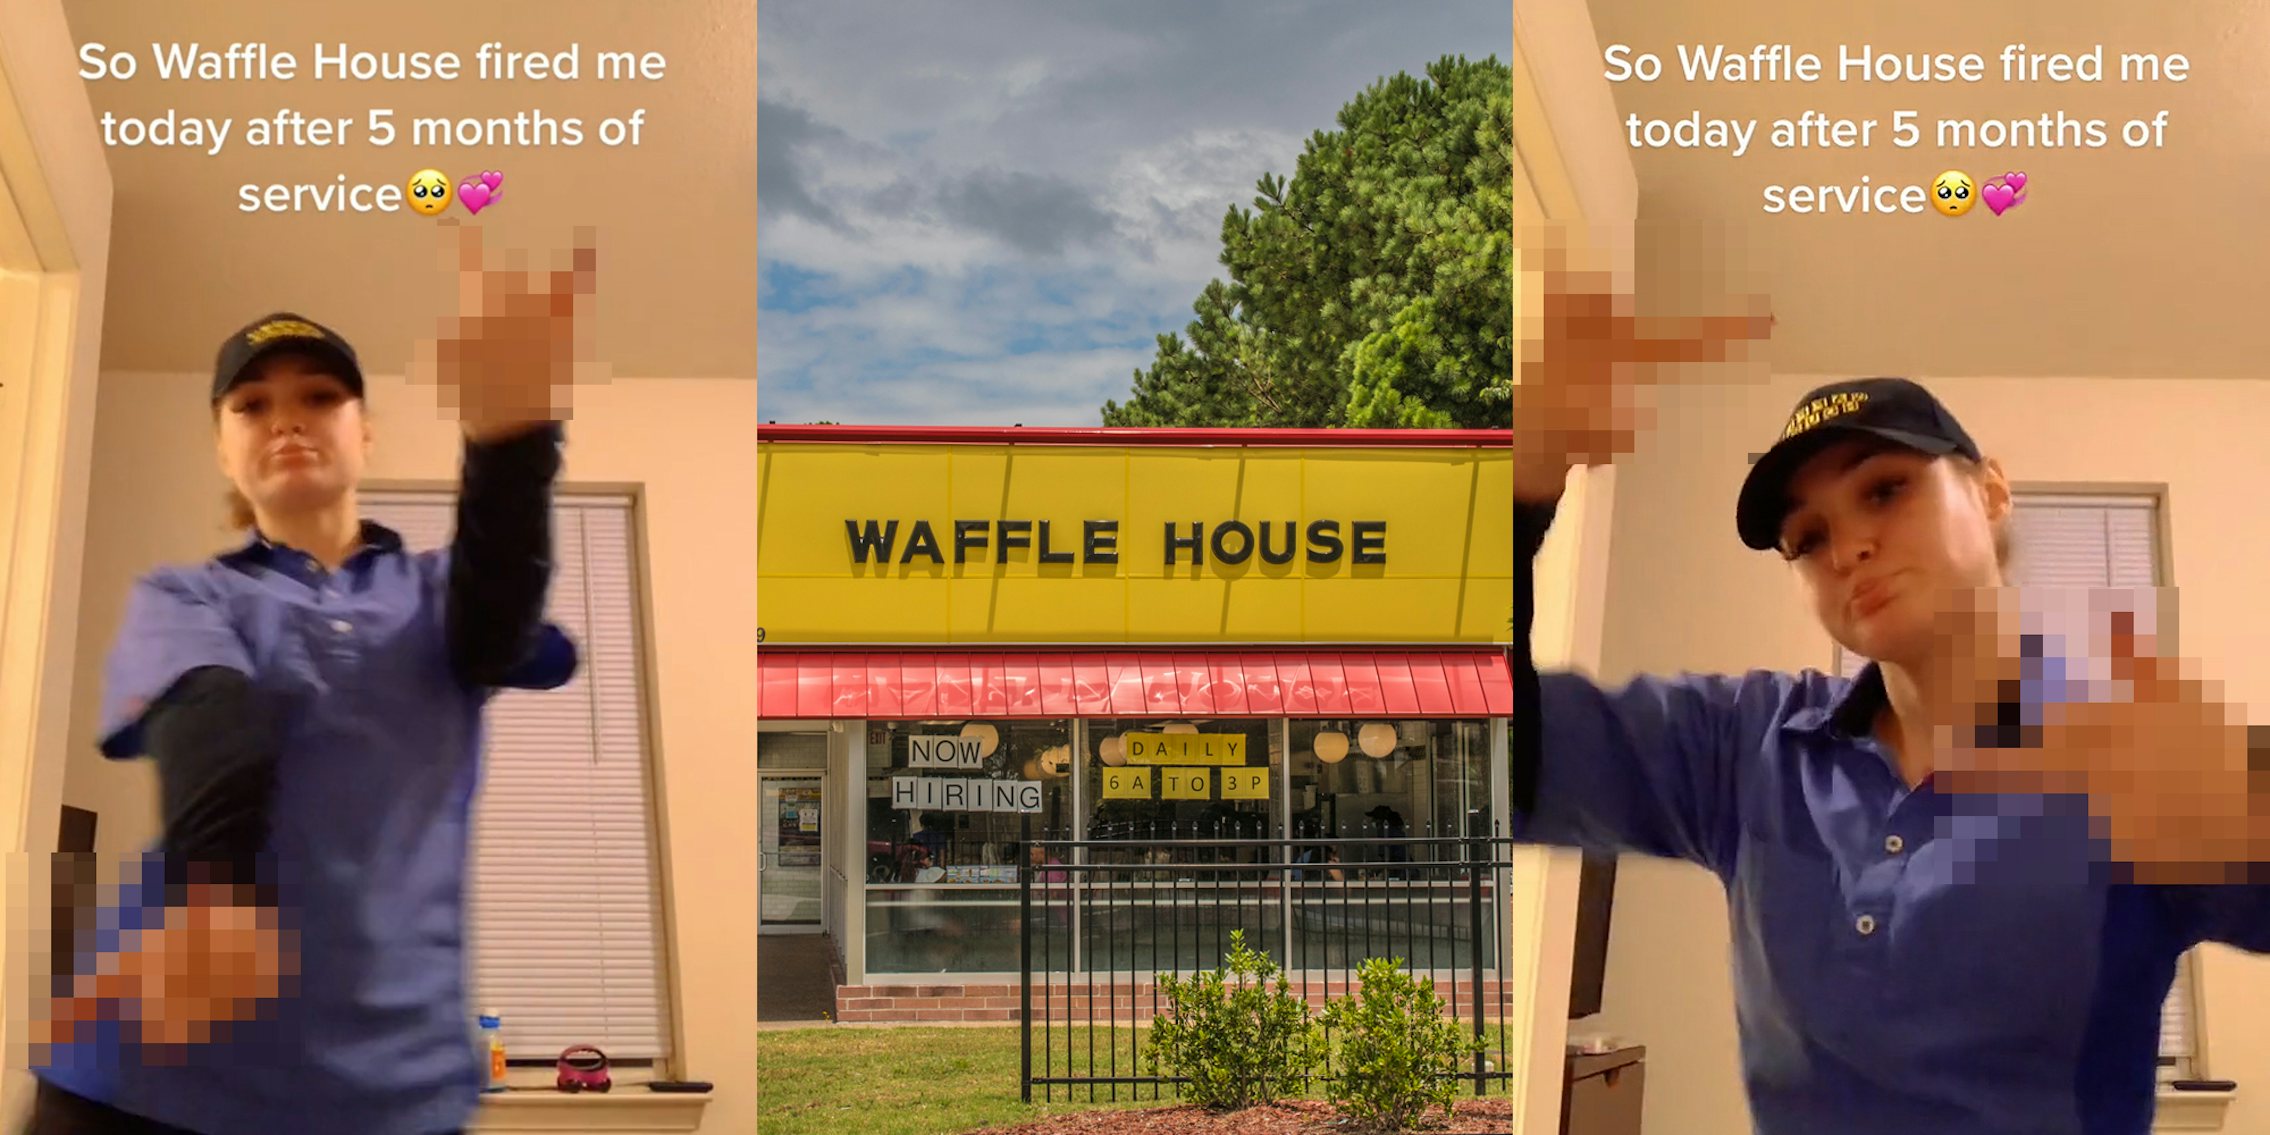 Waffle House employee flipping camera off caption 'So Waffle House fired me today after 5 months of service' (l) Waffle House building with sign (c) Waffle House employee flipping camera off caption 'So Waffle House fired me today after 5 months of service' (r)